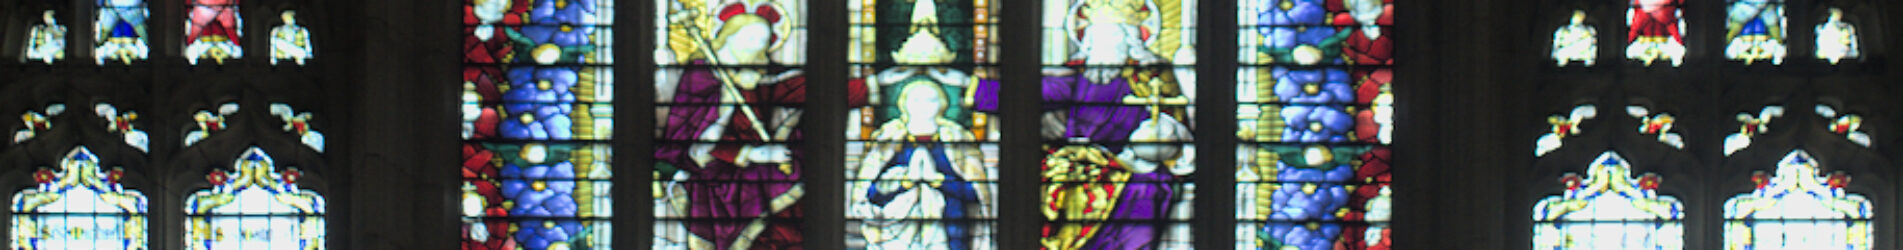 A stained glass window depicting the coronation of the Blessed Virgin Mary